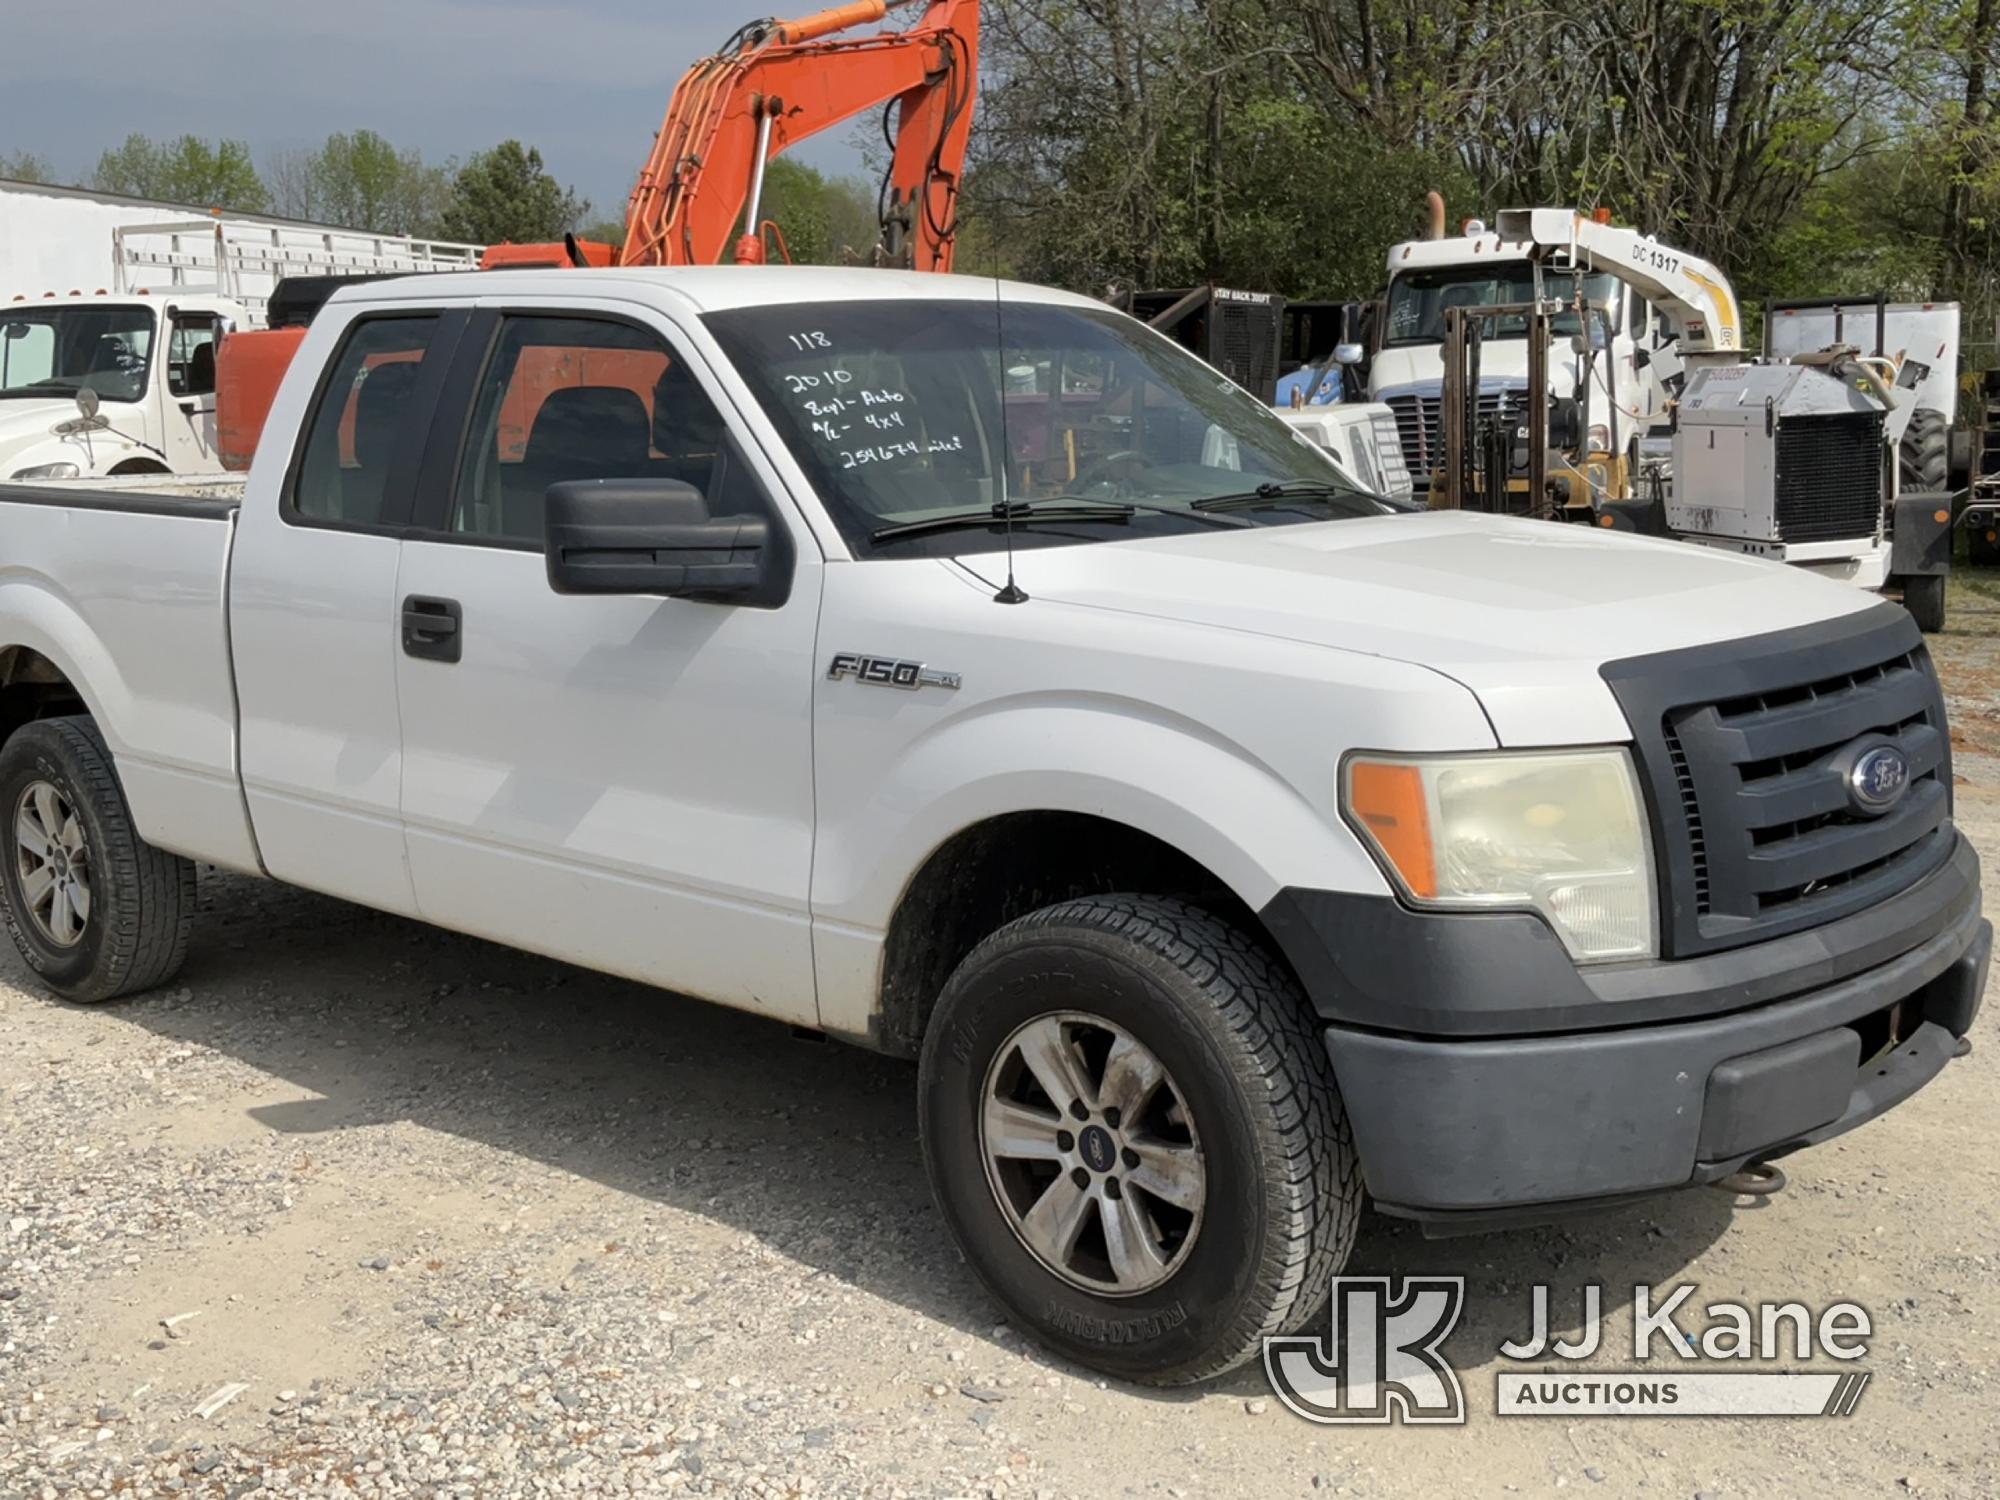 (Charlotte, NC) 2010 Ford F150 4x4 Extended-Cab Pickup Truck Runs & Moves) (Body/Paint Damage